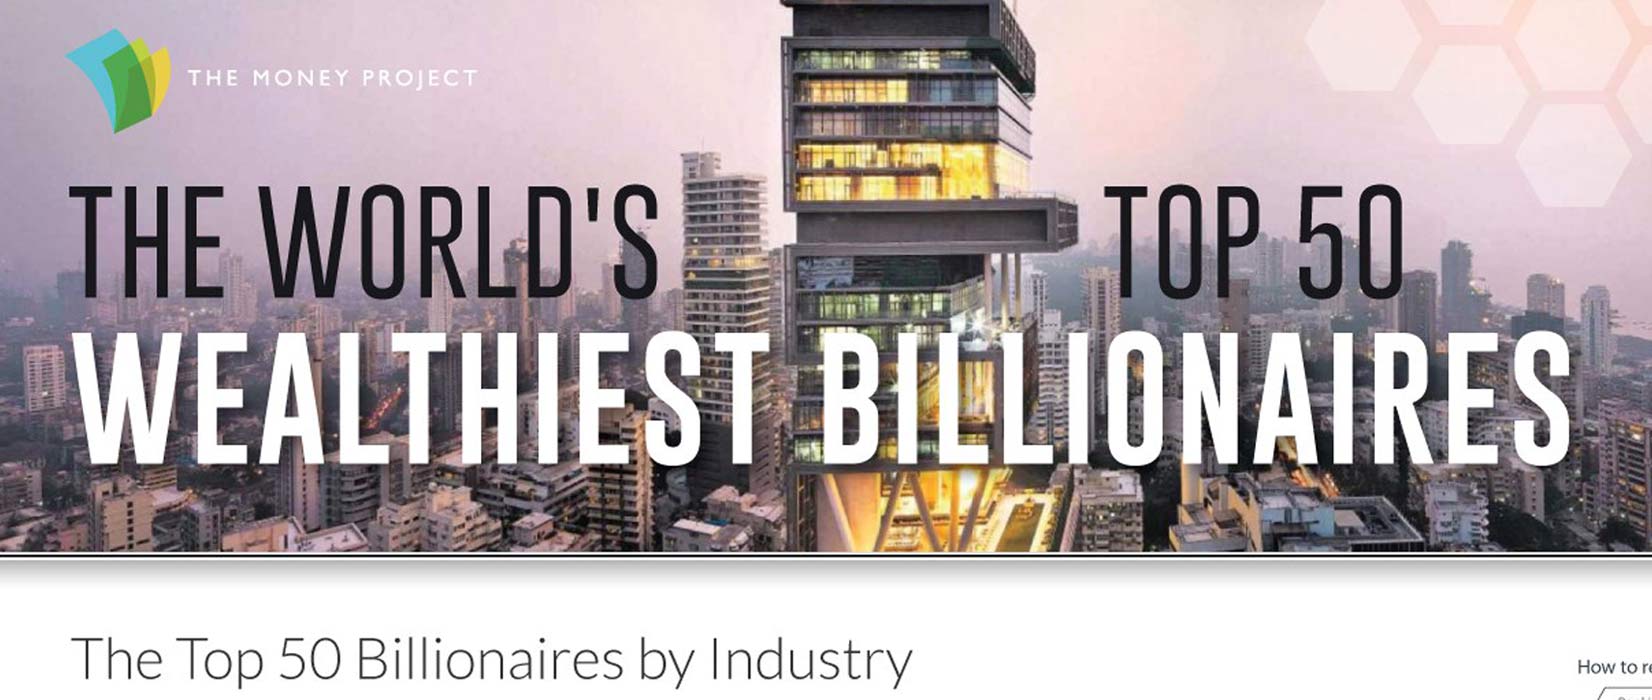 Visualizing The World’s Top 50 Wealthiest Billionaires